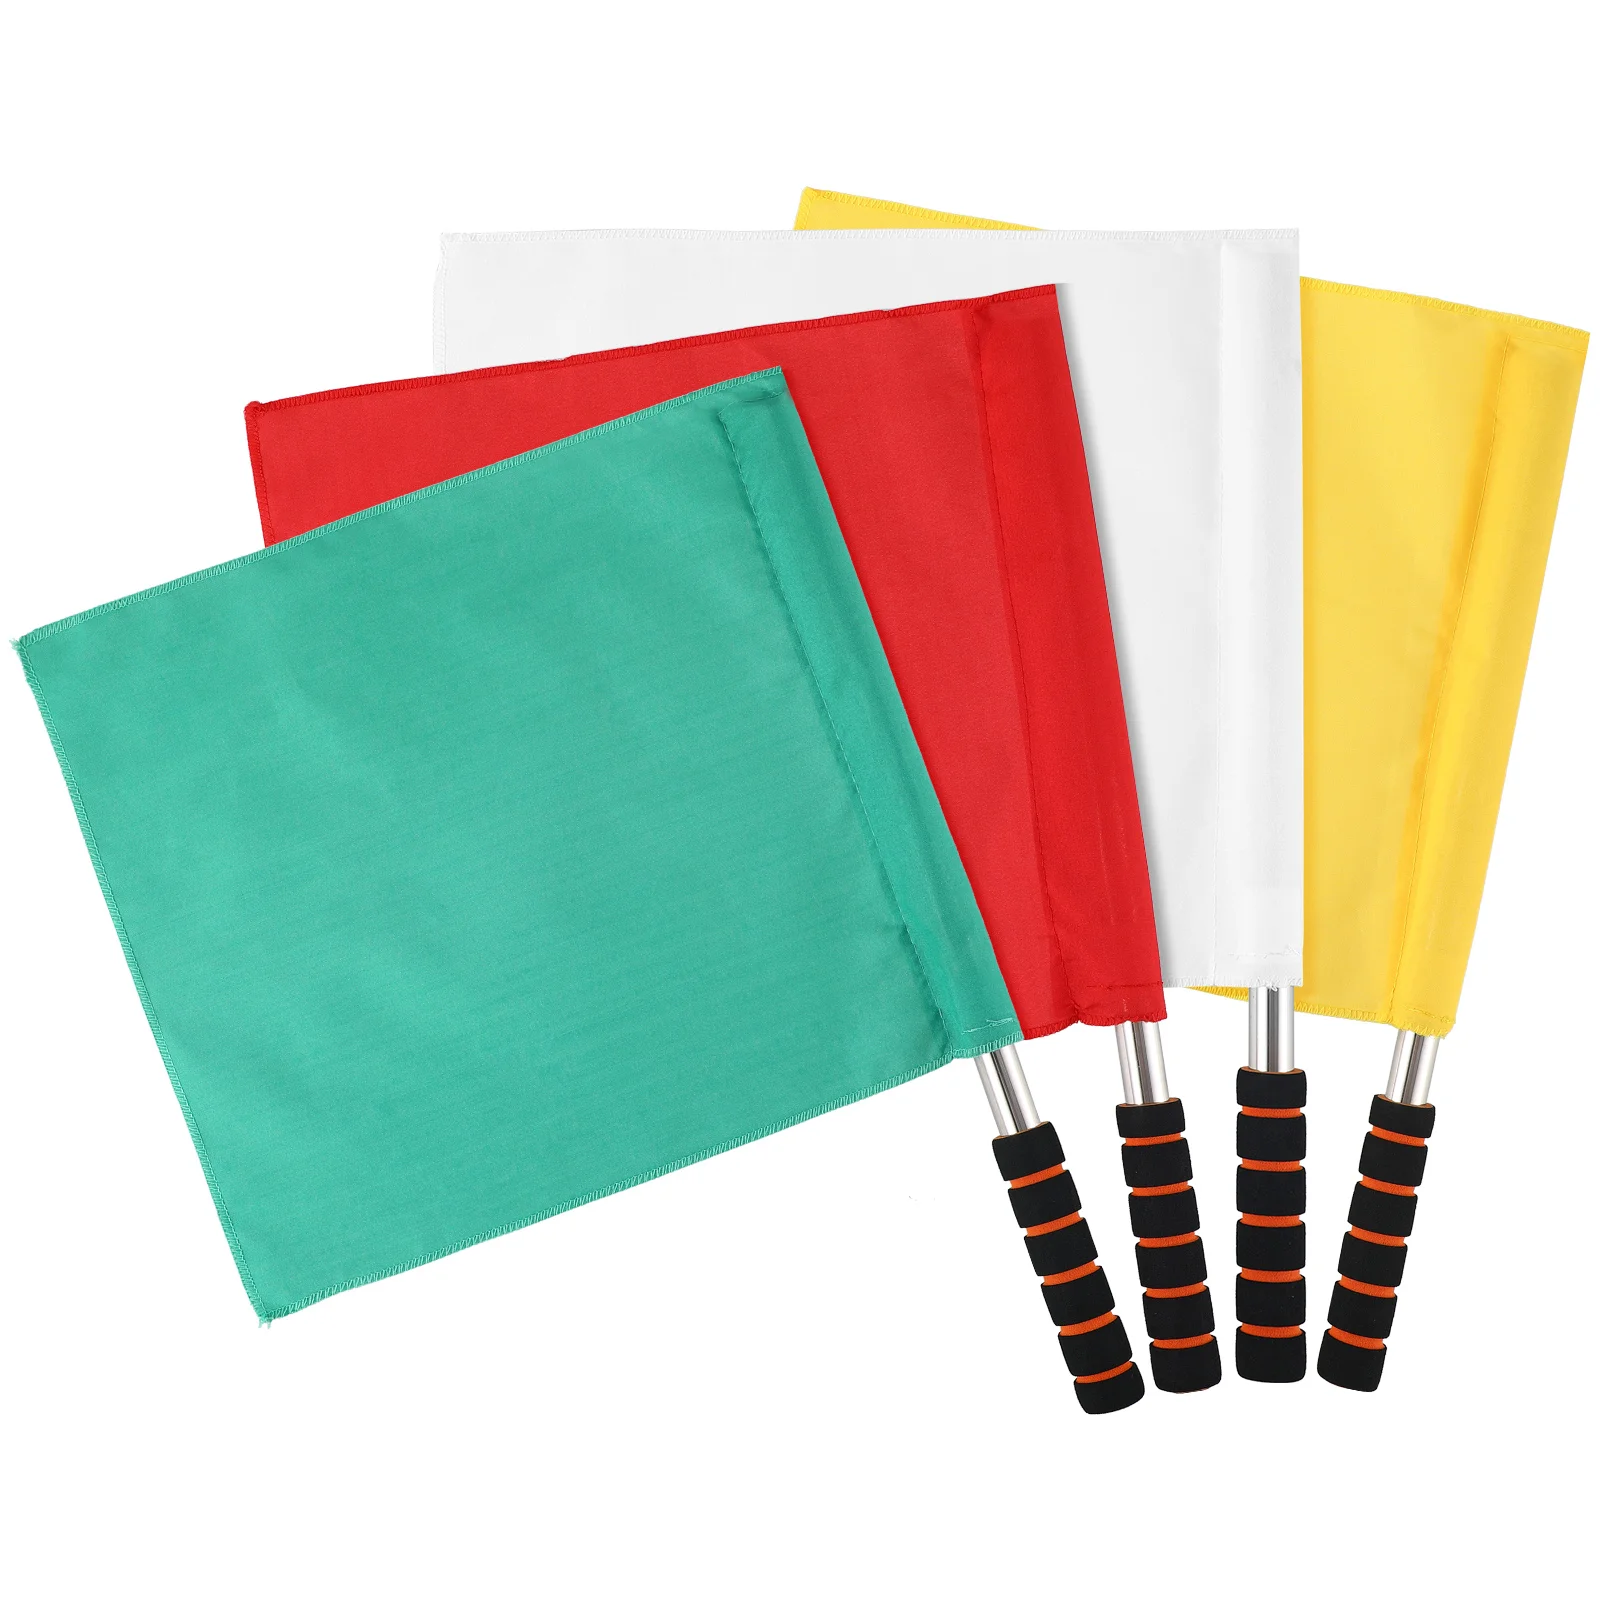 

Small Flags Hand Held Small Flag Country Flags On Stick Flags Banners On Stick Parades Party Decorations Referee Flags